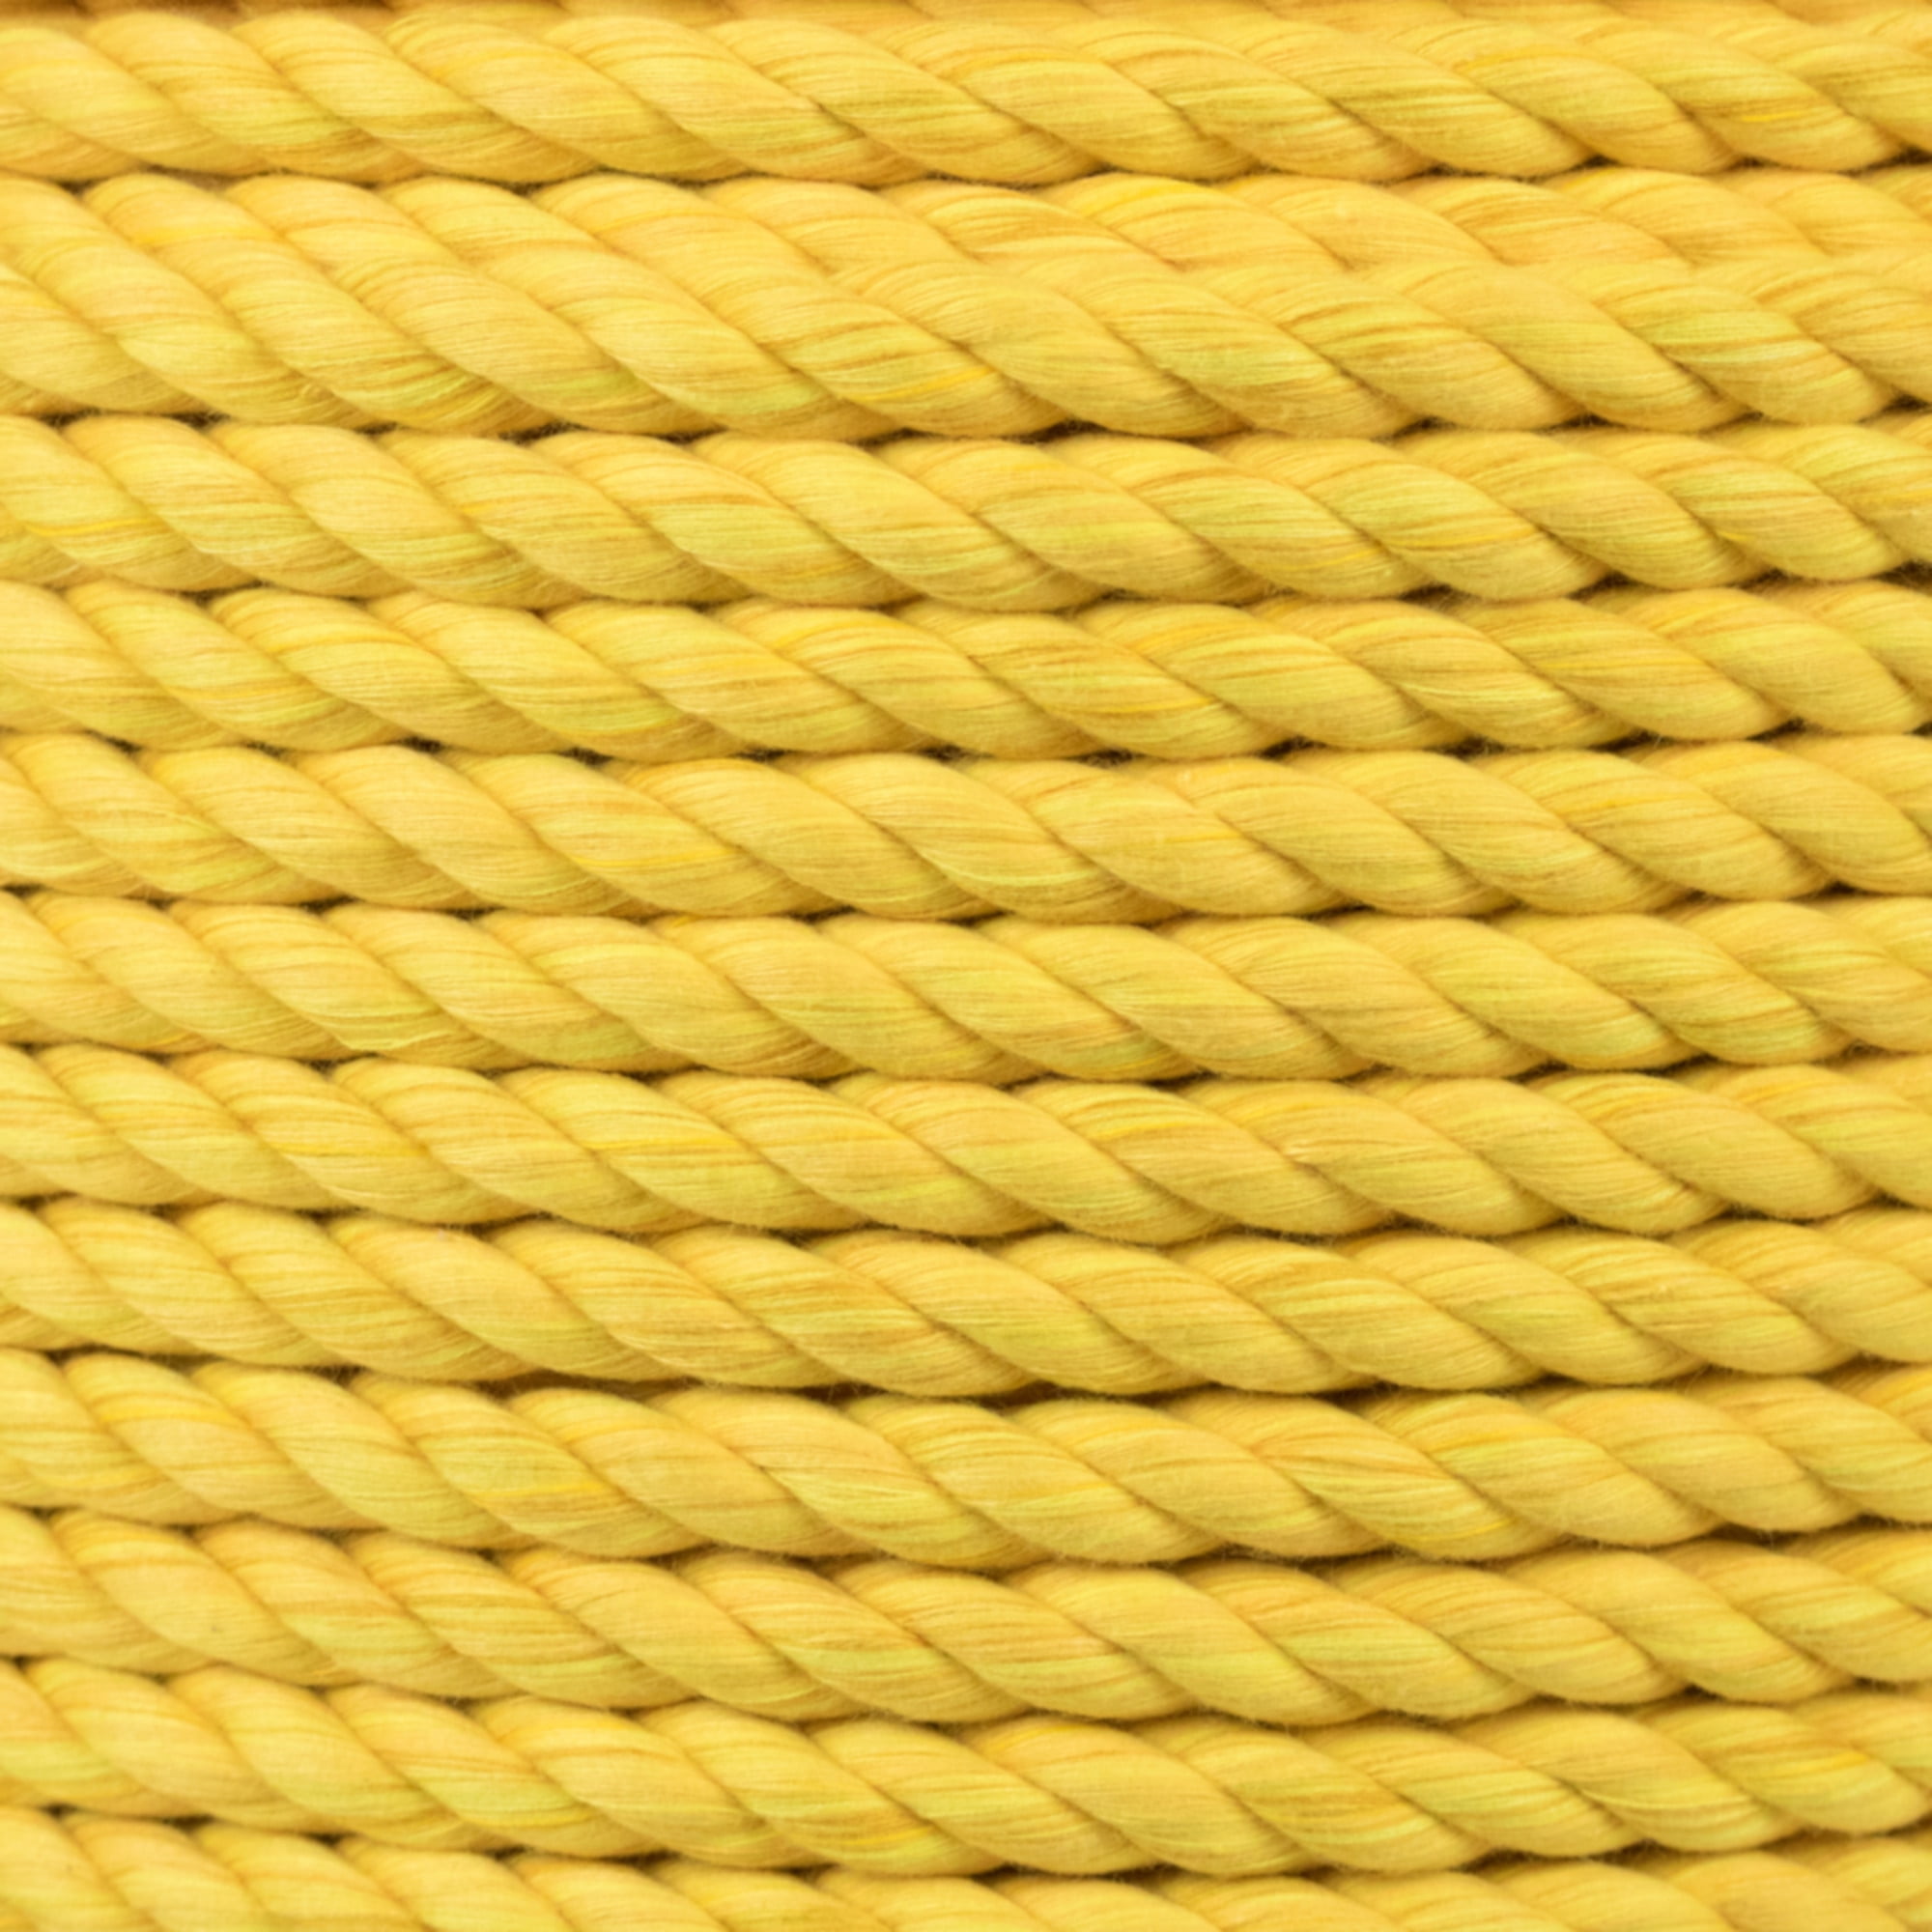 White Cotton Rope GOLBERG Twisted 100% Natural Cotton Rope 1/2 Inch x 300 Feet 